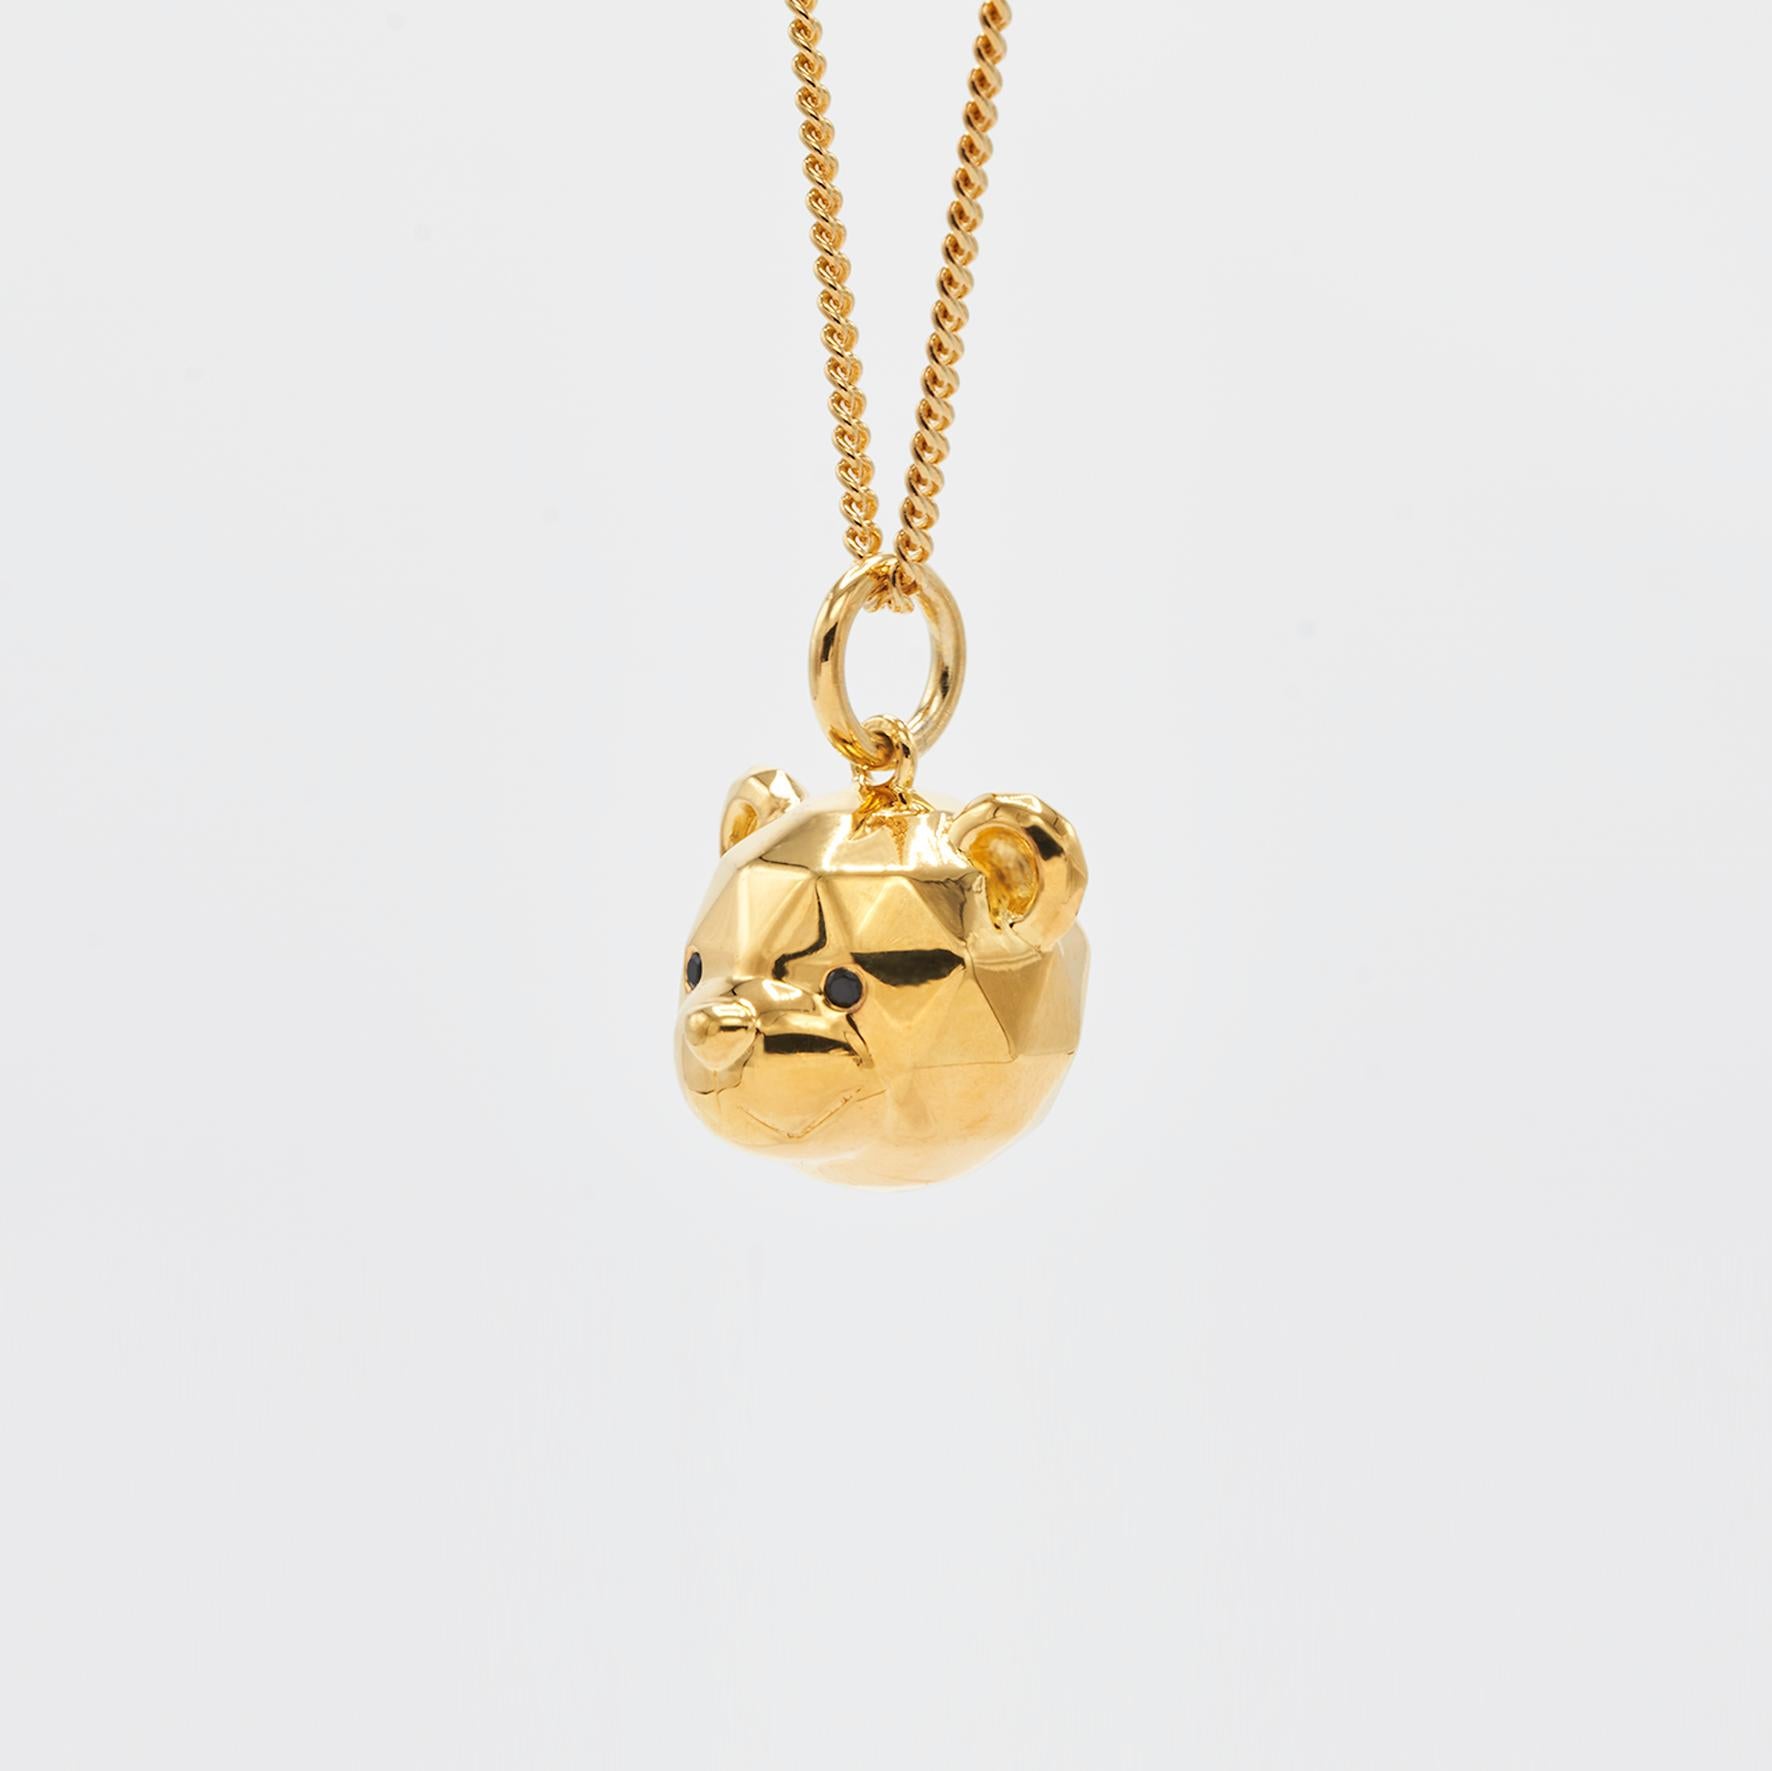 Fun cut bear pendant from our NOT A TOY collection.

Dimensions:
13mm x 11mm, chain 45cm + 5cm extender            
Composition: 
Sterling Silver 24k gold plated / cubic zirconia
Sold with chain